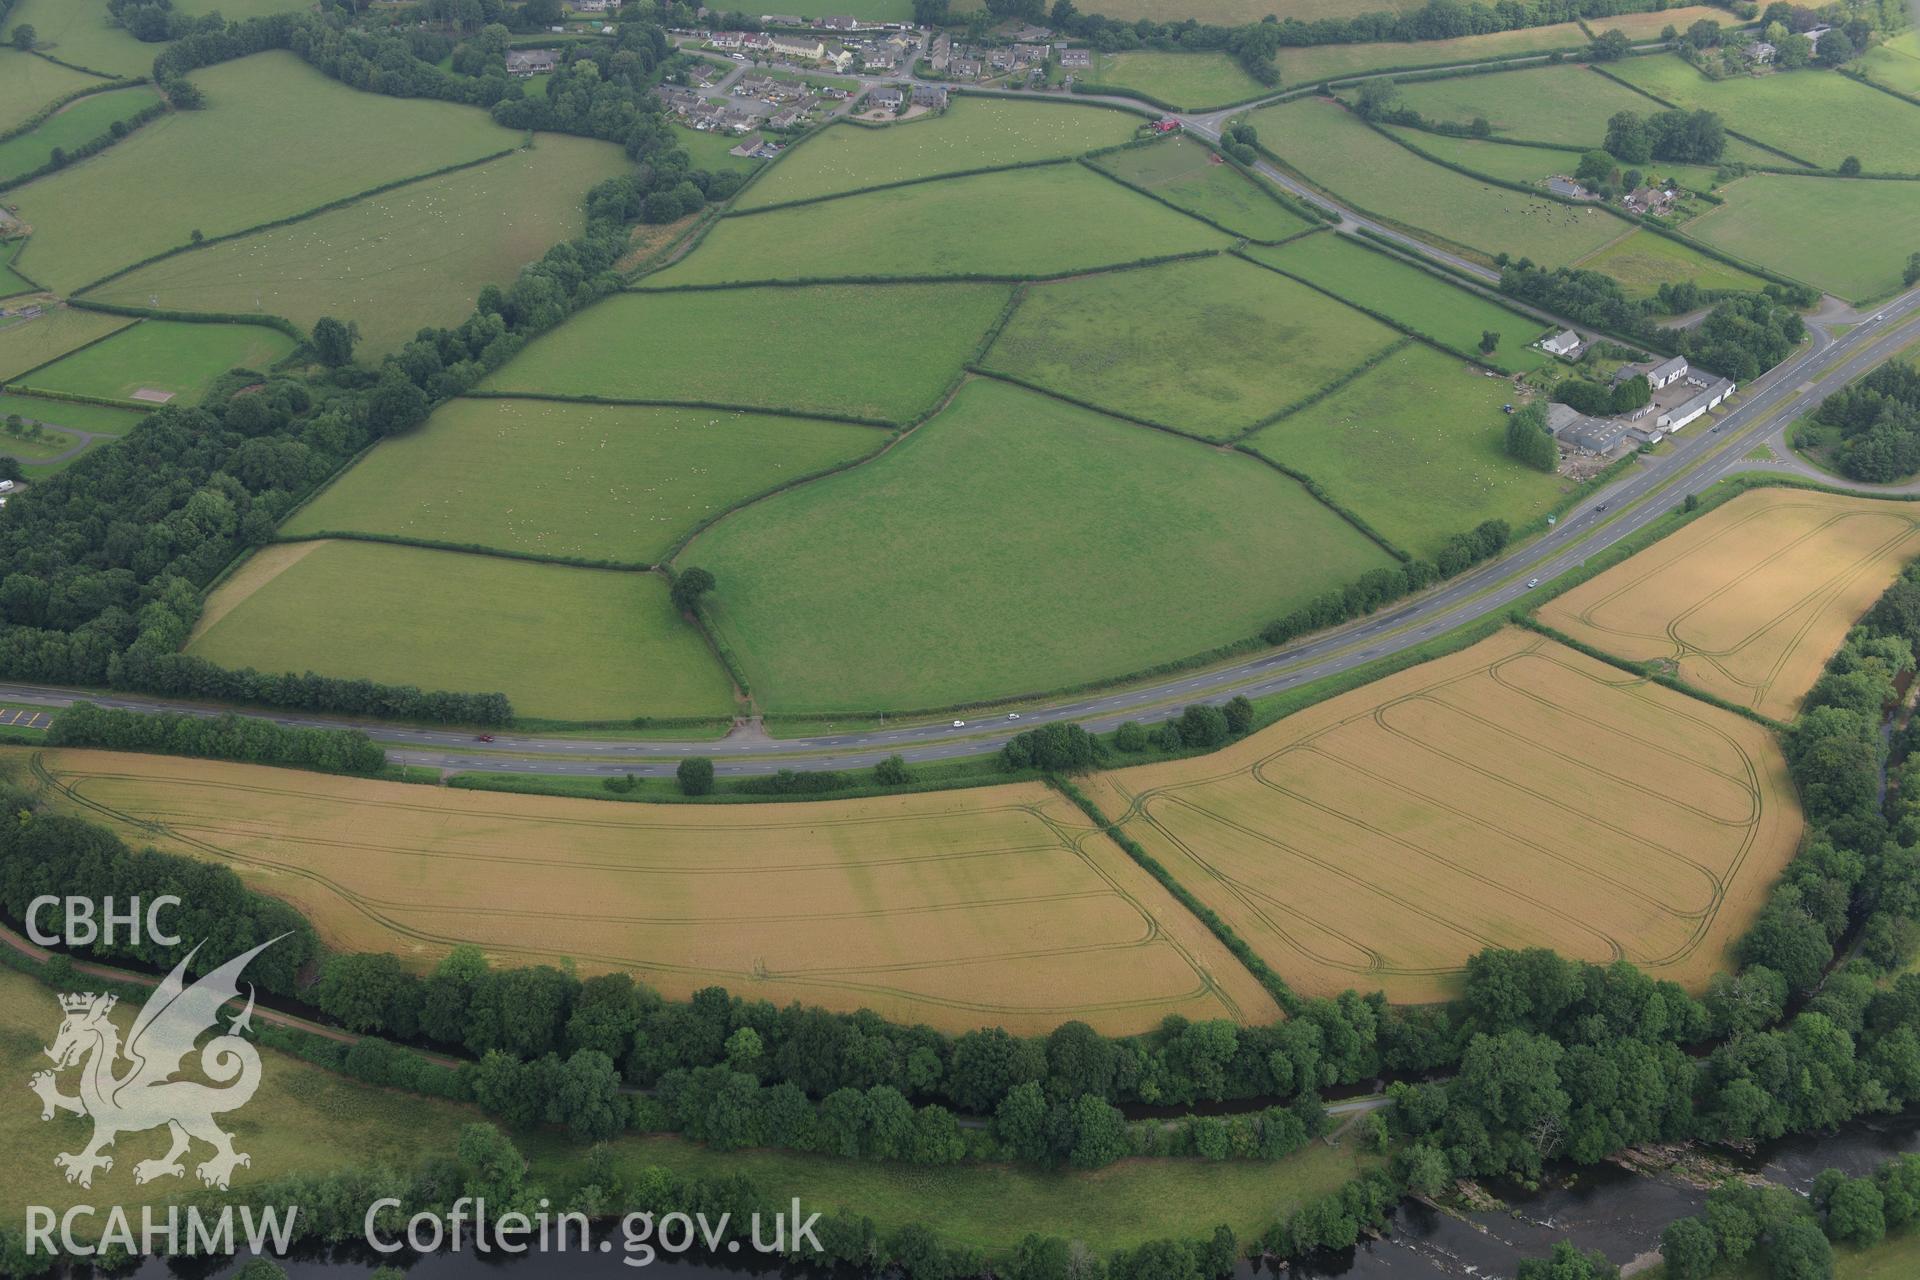 Cefn-brynich Roman fort, general view of cropmarks from south-west, taken by RCAHMW 1st August 2013.